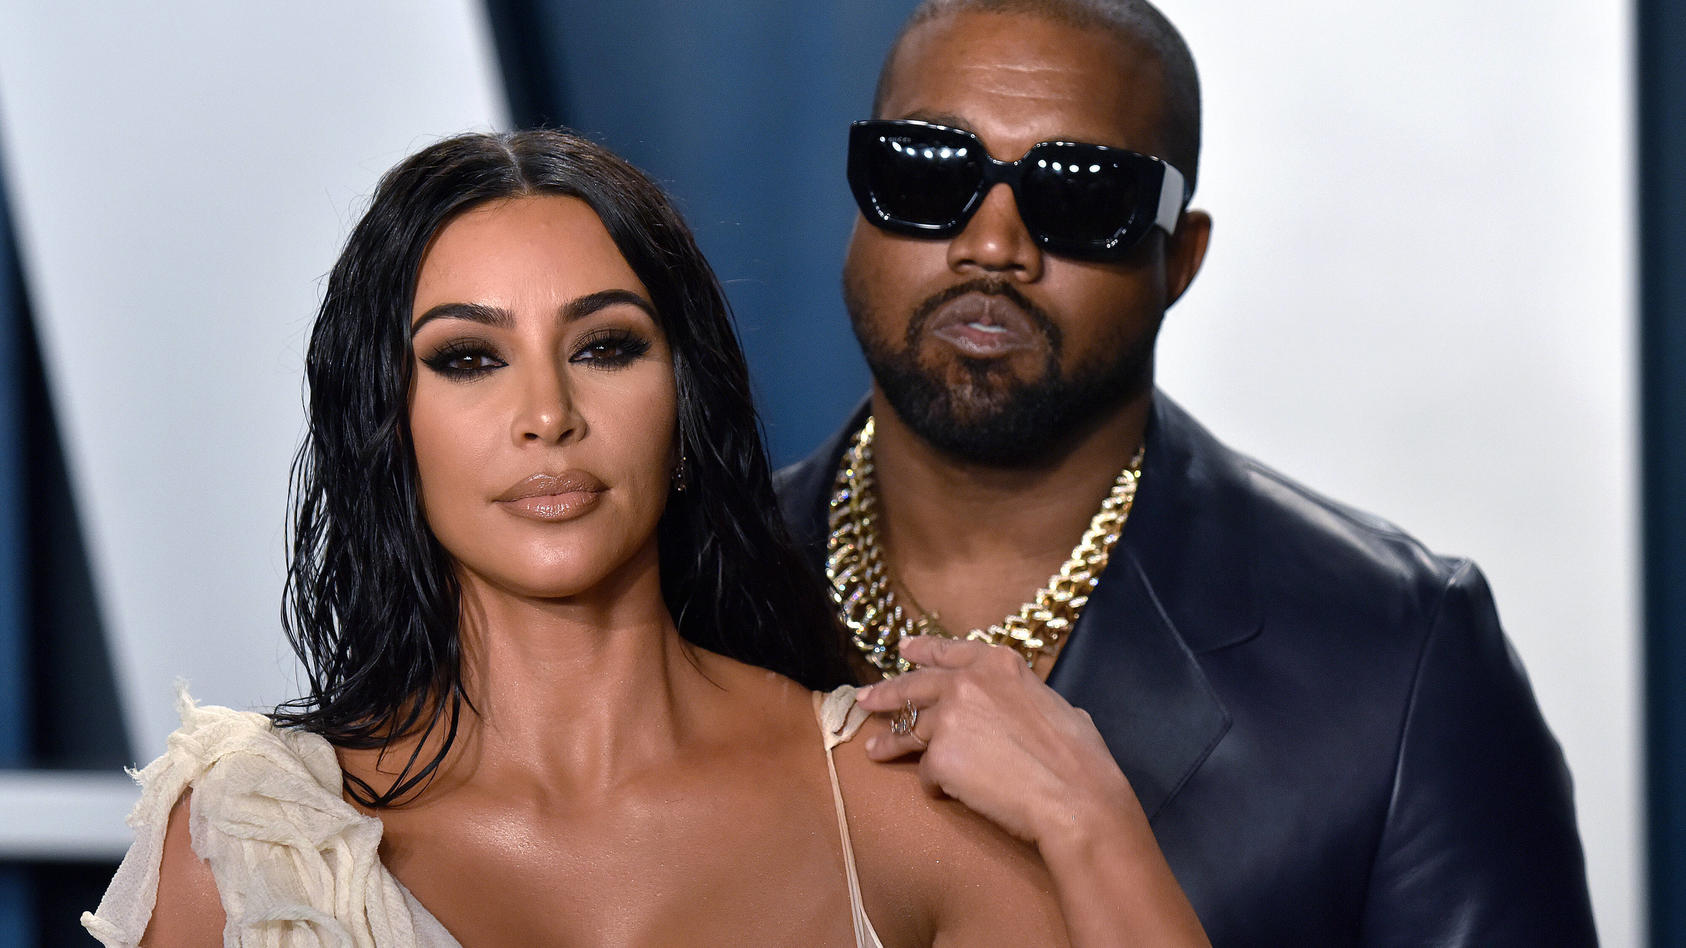  Kim Kardashian L and Kanye West arrive for the Vanity Fair Oscar party at the Wallis Annenberg Center for the Performing Arts in Beverly Hills, California on February 9, 2020. PUBLICATIONxINxGERxSUIxAUTxHUNxONLY LAP202002090811 CHRISxCHEW